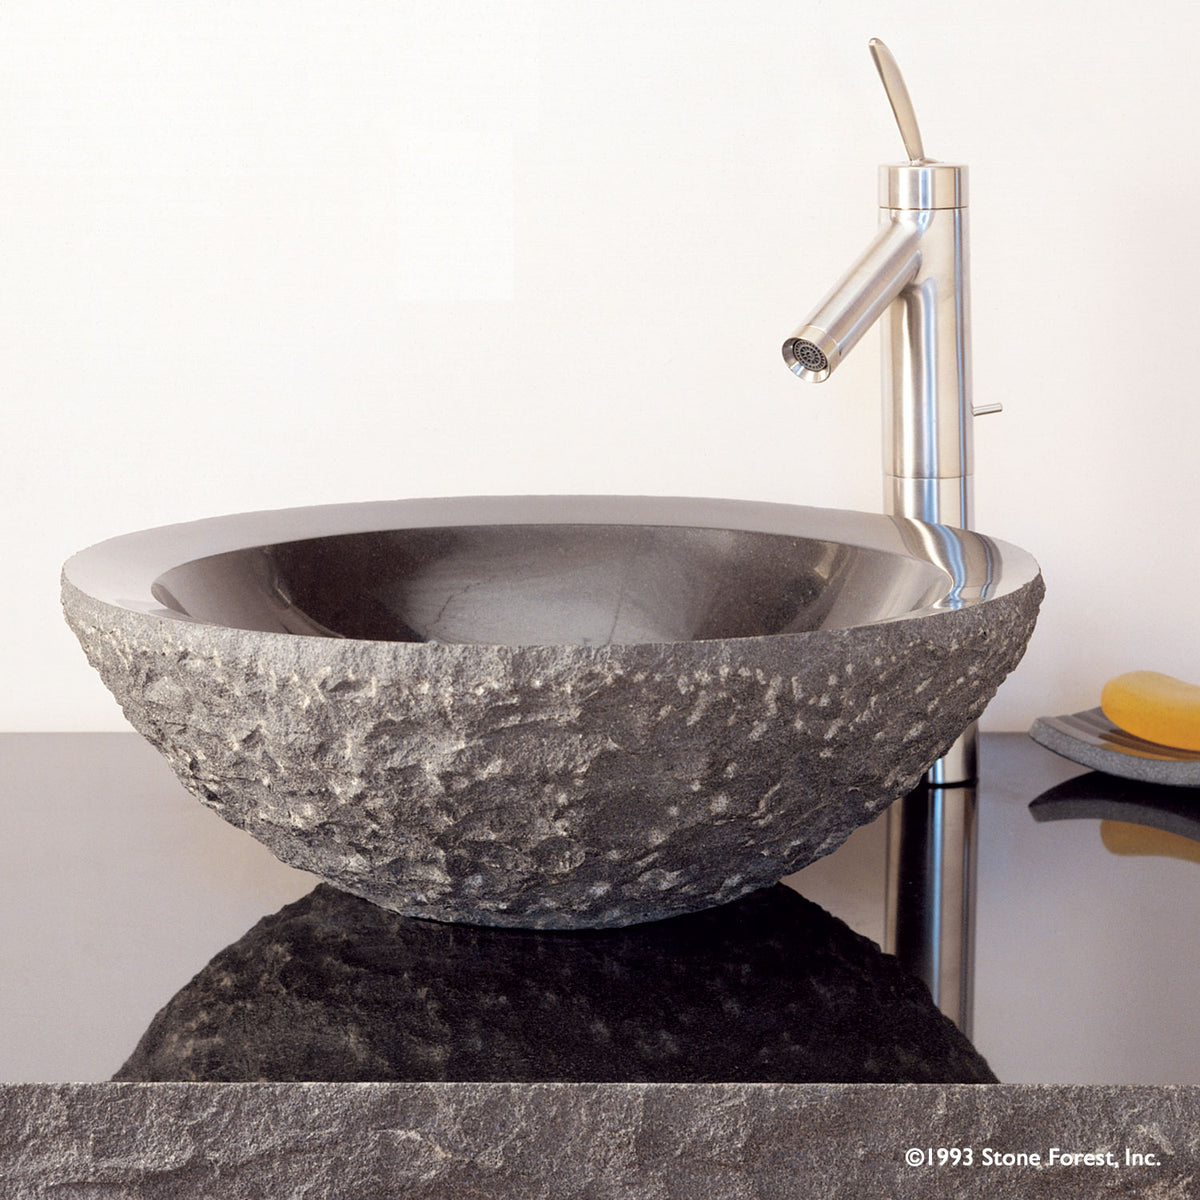 Beveled Rim vessel sink carved from black granite with rough chiseled exterior and polished interior. image 1 of 1